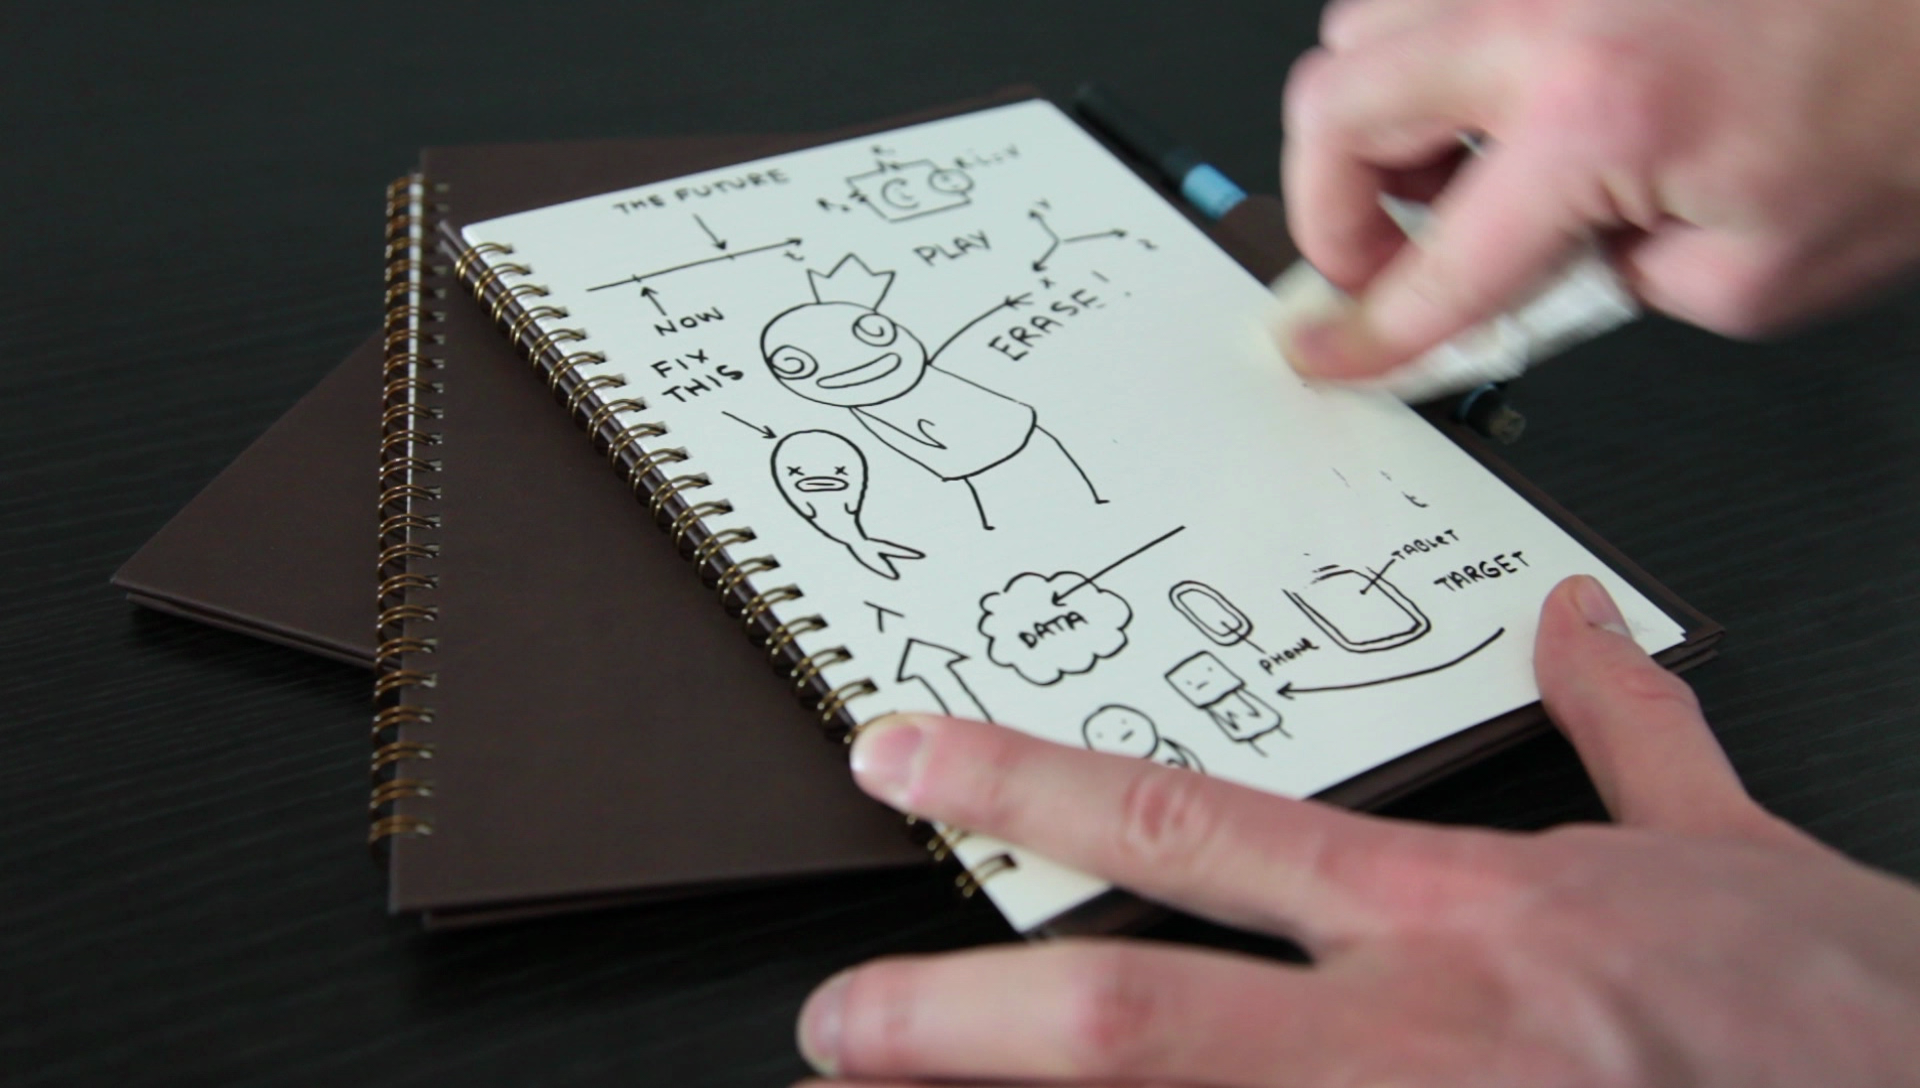 Mini Wipebook Pro + smart erasable notebook syncs all of your